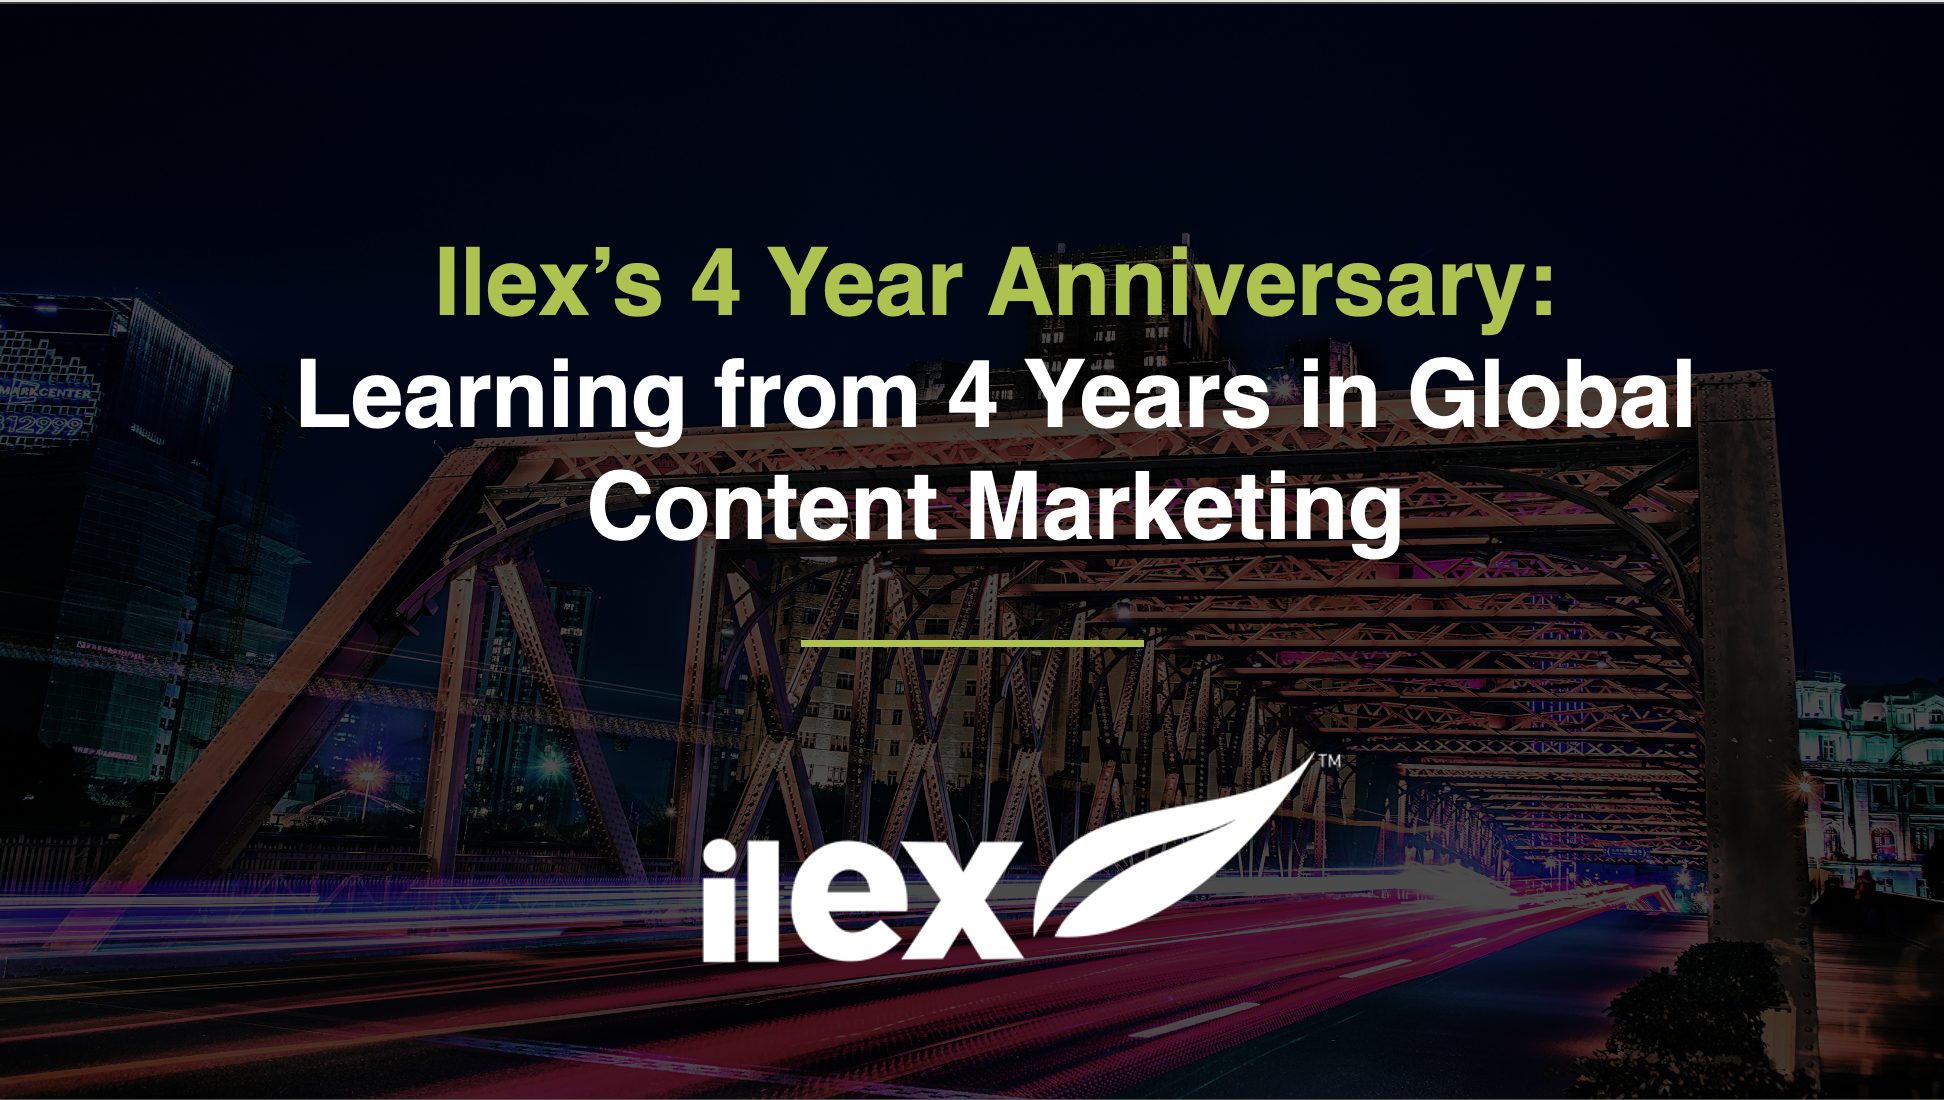 Ilex’s 4 Year Anniversary: Learning from 4 Years in Global Content Marketing